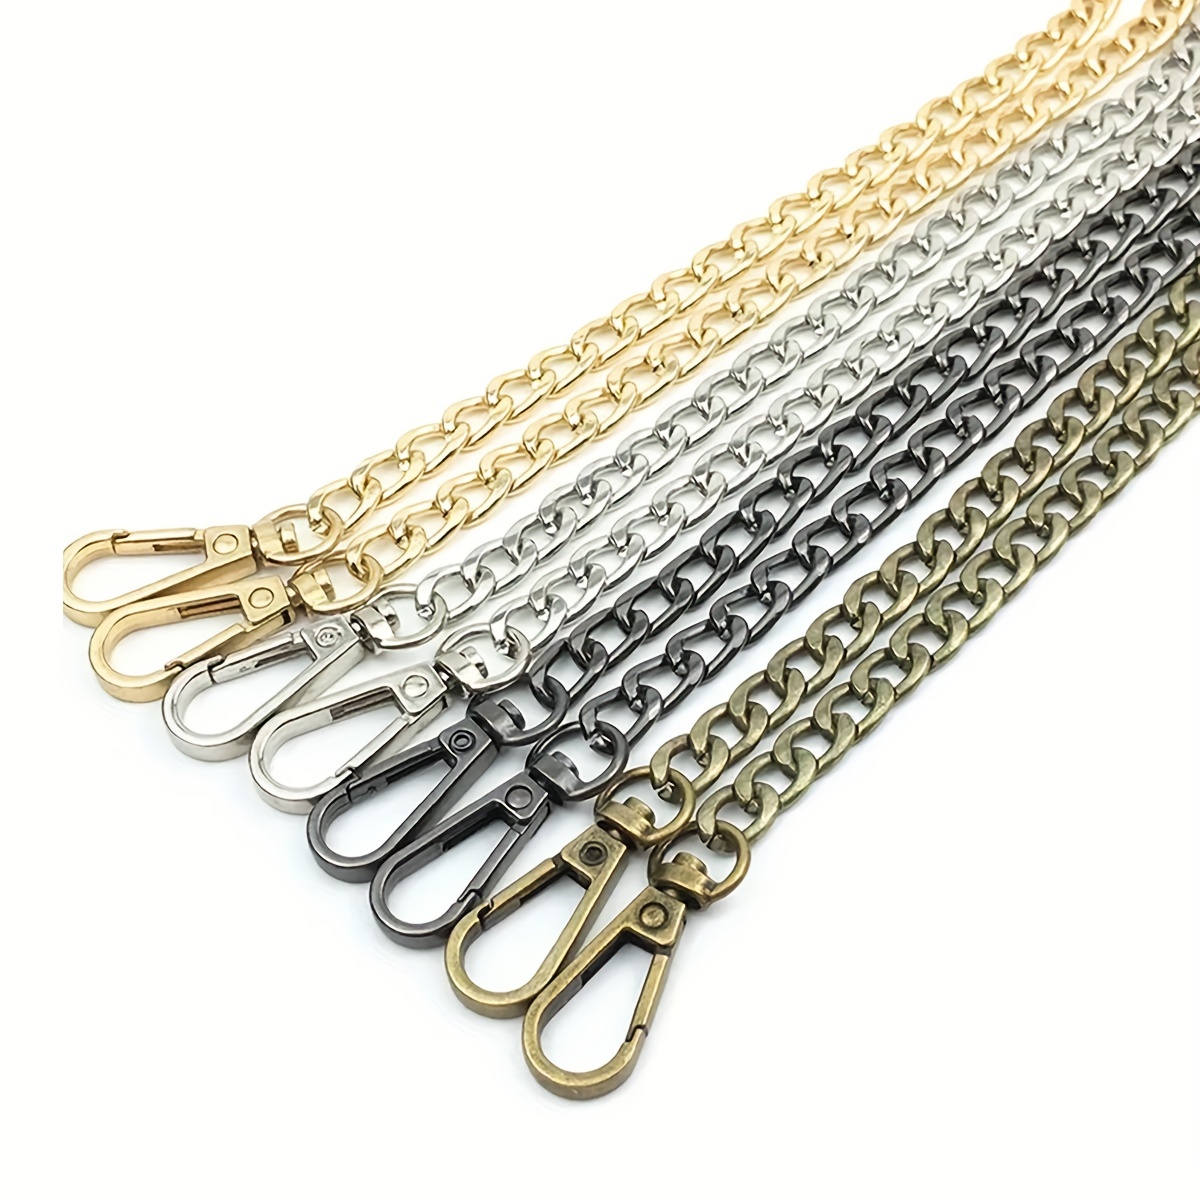 Custom Beautiful Decorative Bag Accessories Handbag Parts Purse Handle for  Shoulder Luggage Hardware Metal Chains Bag Strap - China Handbag Chain  Strap and Chains for Bags price